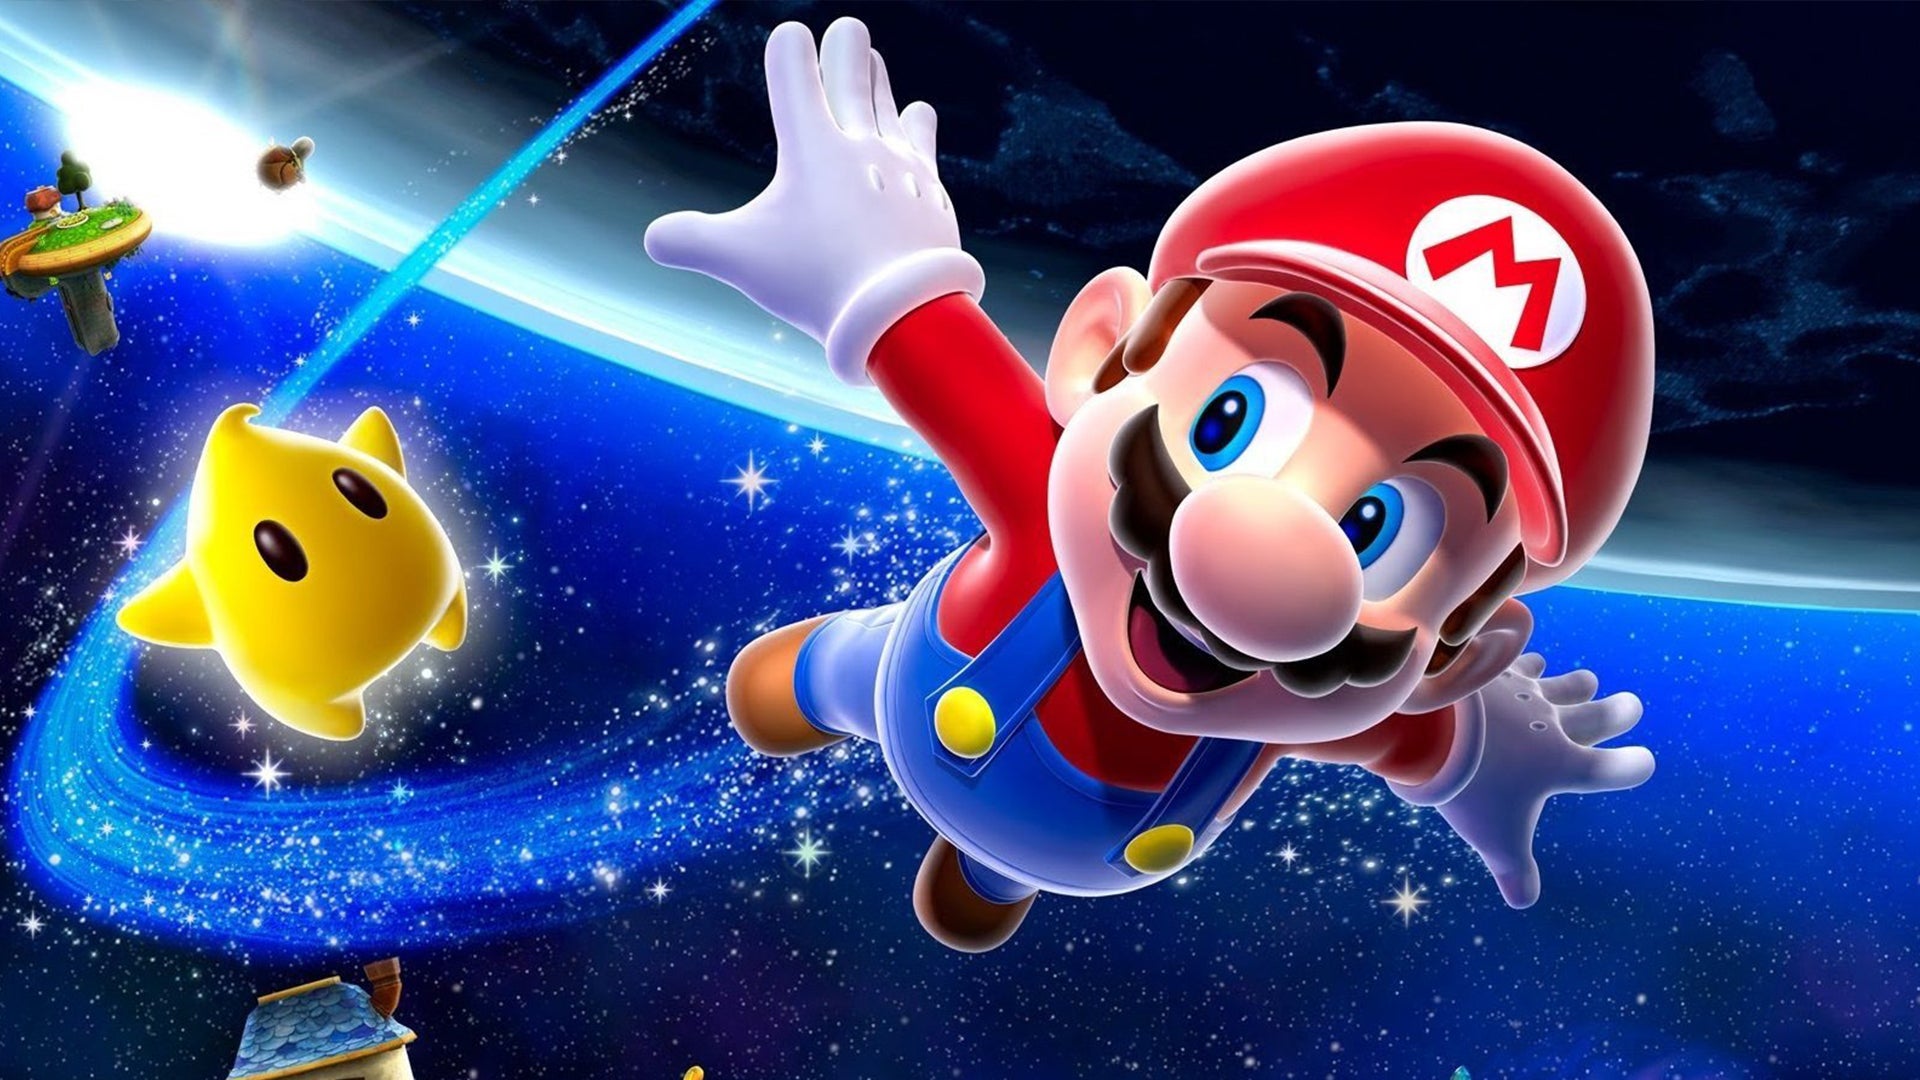 Image for Super Mario Galaxy: Official Tegra X1 Wii Emulator Analysis - Shield TV Gameplay